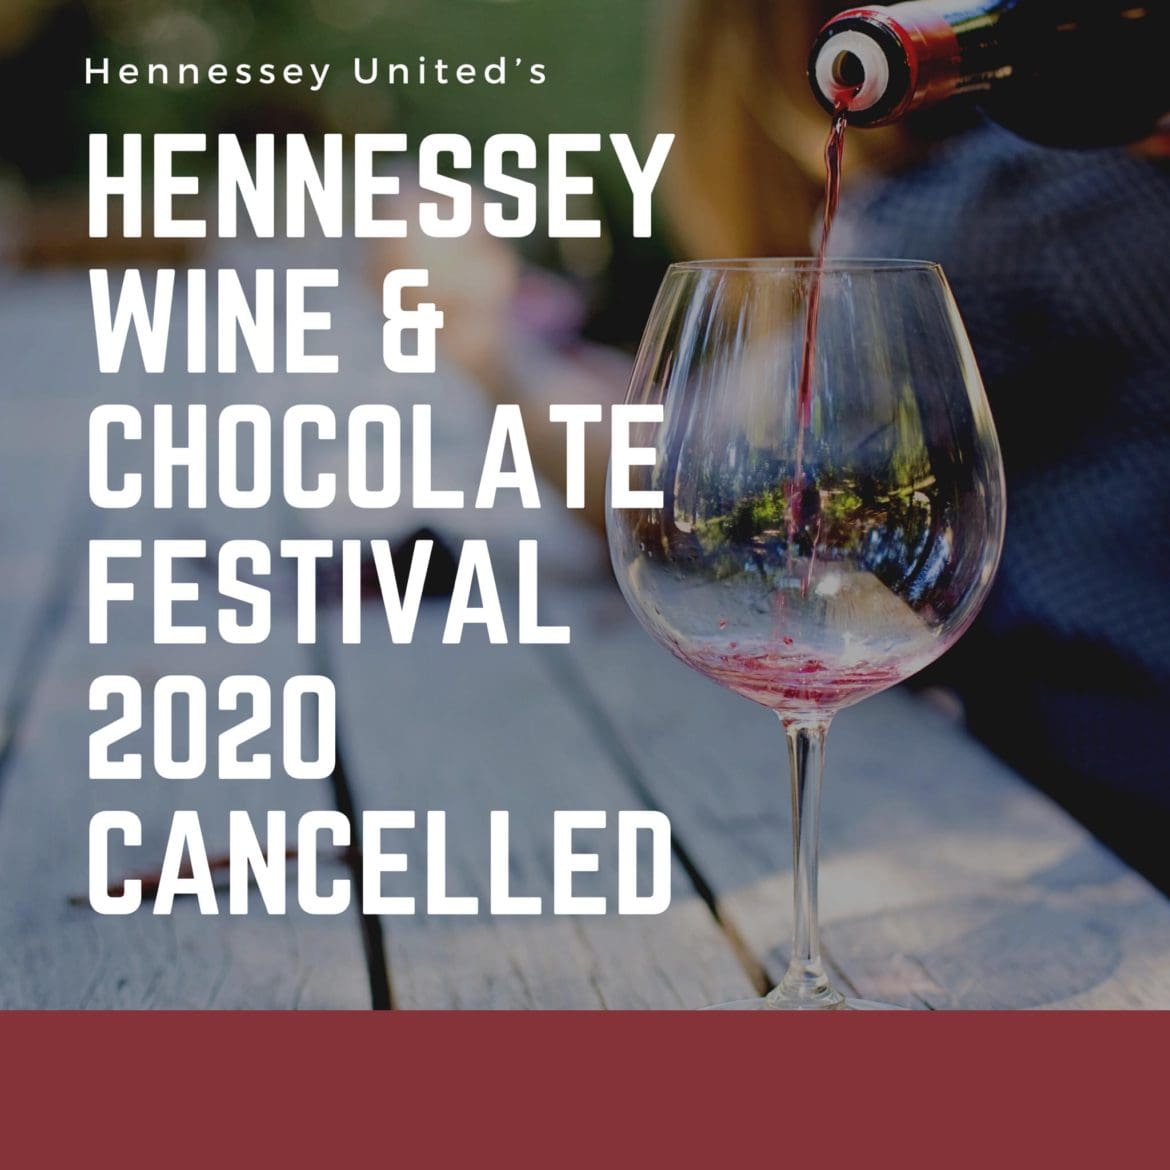 WINE AND CHOCOLATE FESTIVAL IS CANCELLED THIS YEAR.